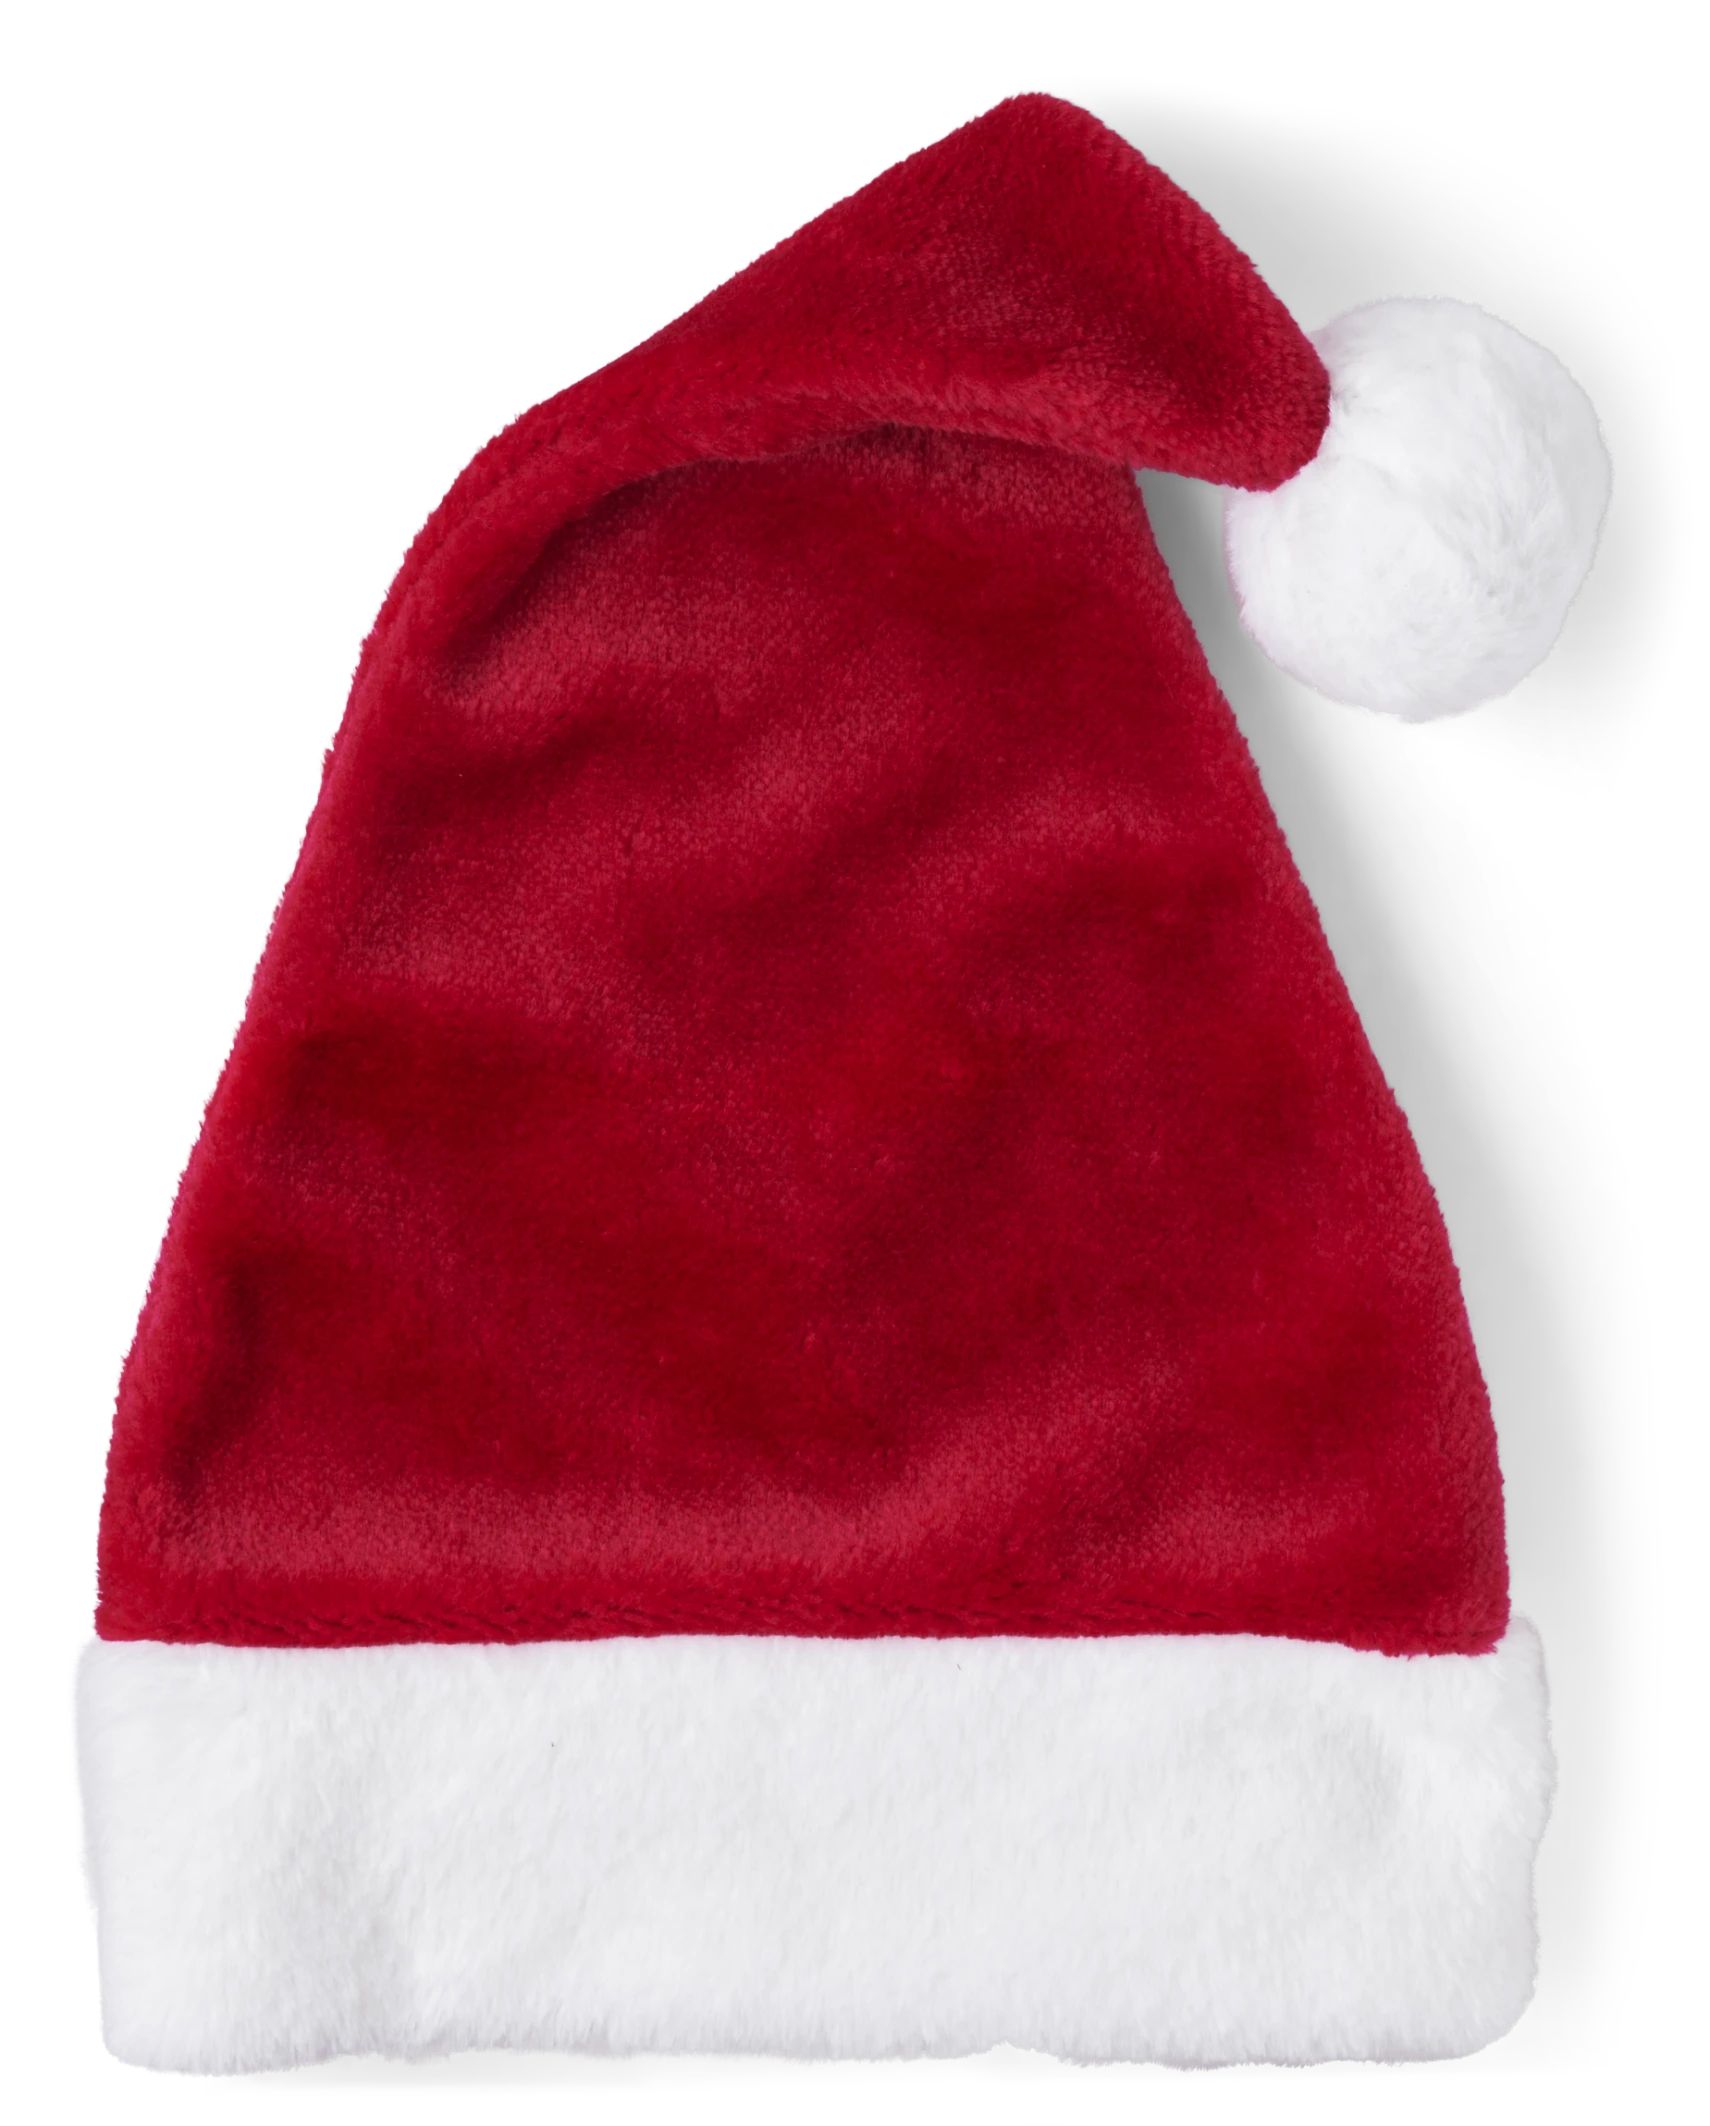 Unisex Adult Matching Family Christmas Santa Hat | The Children's Place  - RUBY | The Children's Place